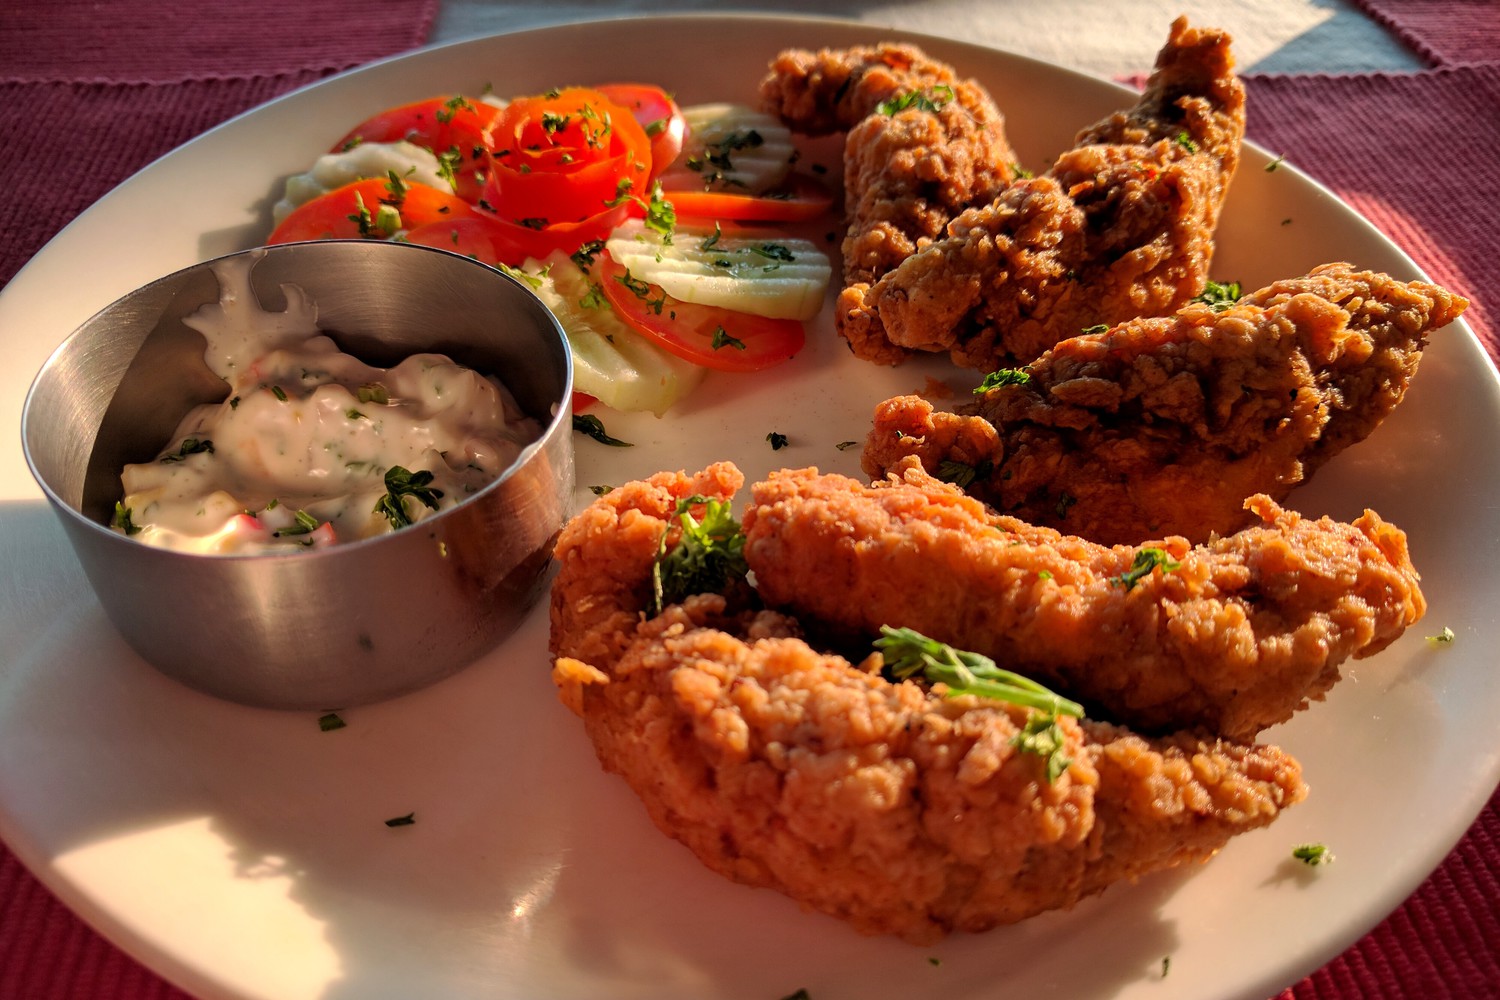 Crispy fried chicken served with sauce and salad